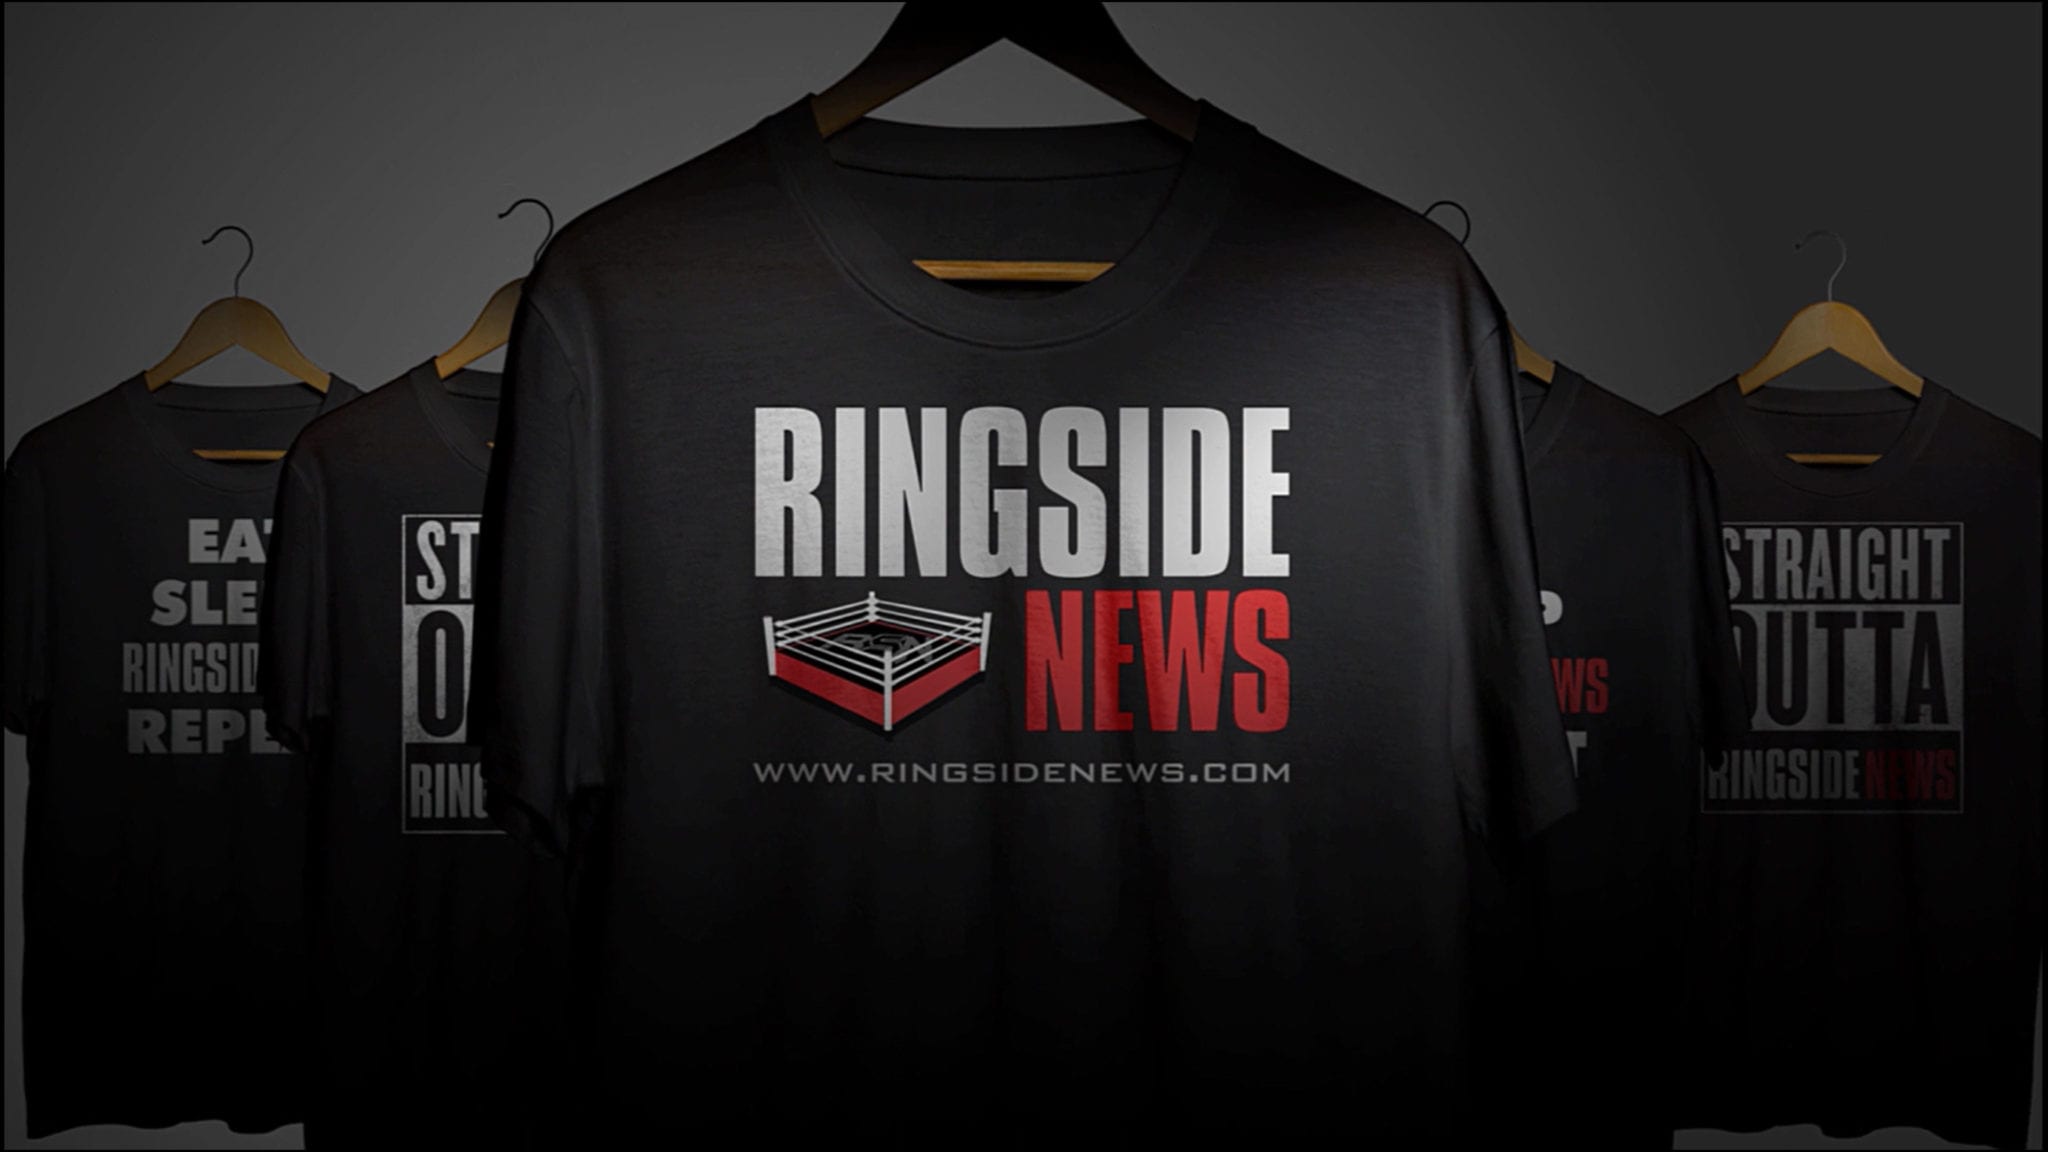 Ringside News Weekly RAW T-Shirt Giveaway